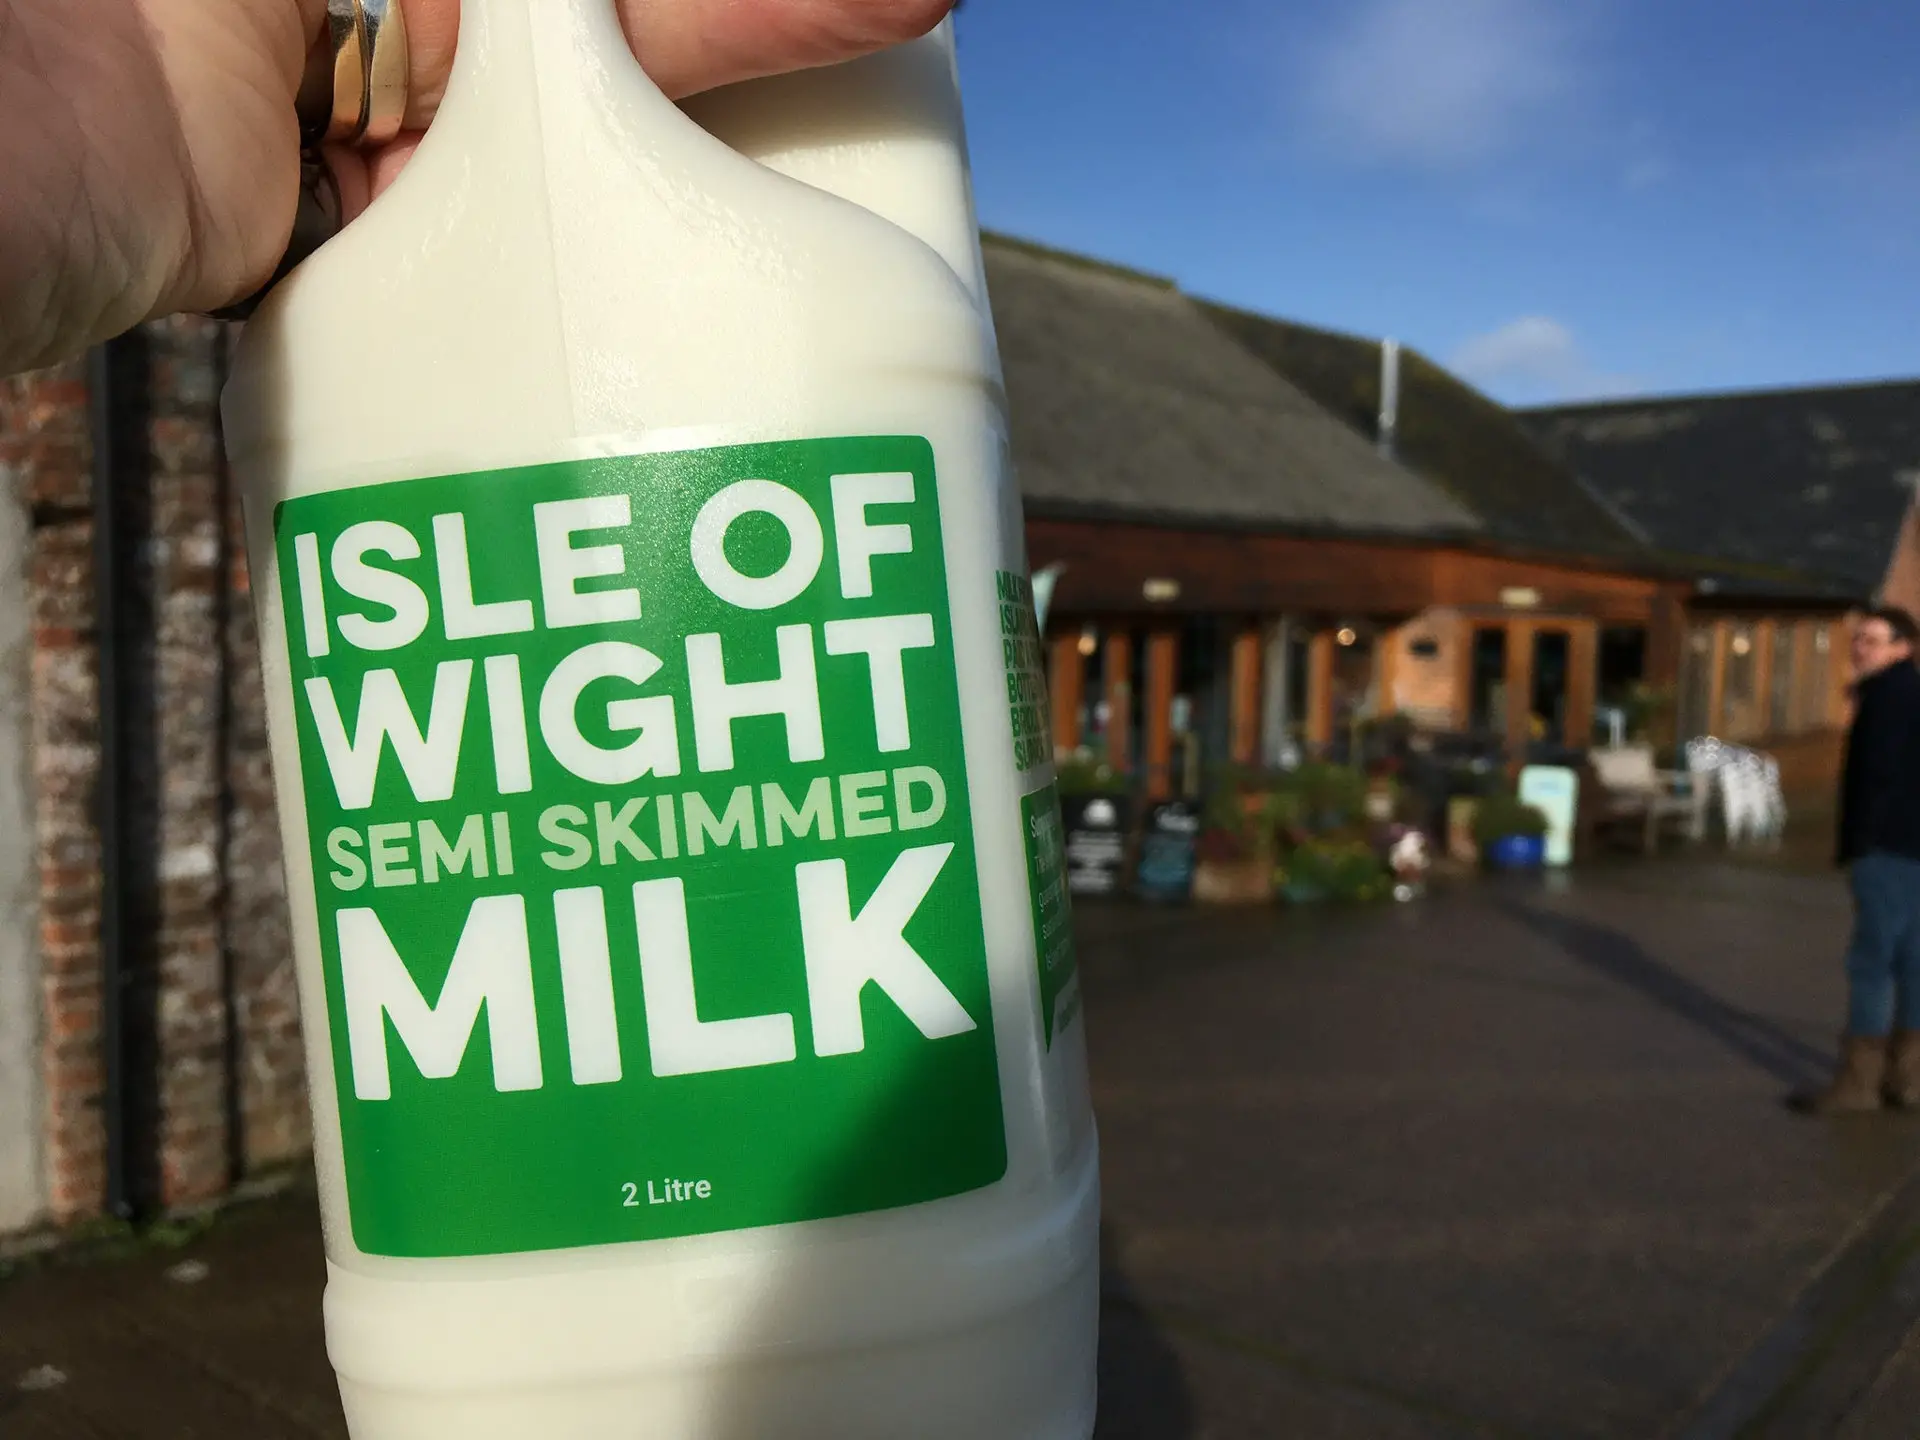 Isle of Wight Milk processing plant at Briddlesford Dairy Farm - bottle of milk being held up outside the farm buildings